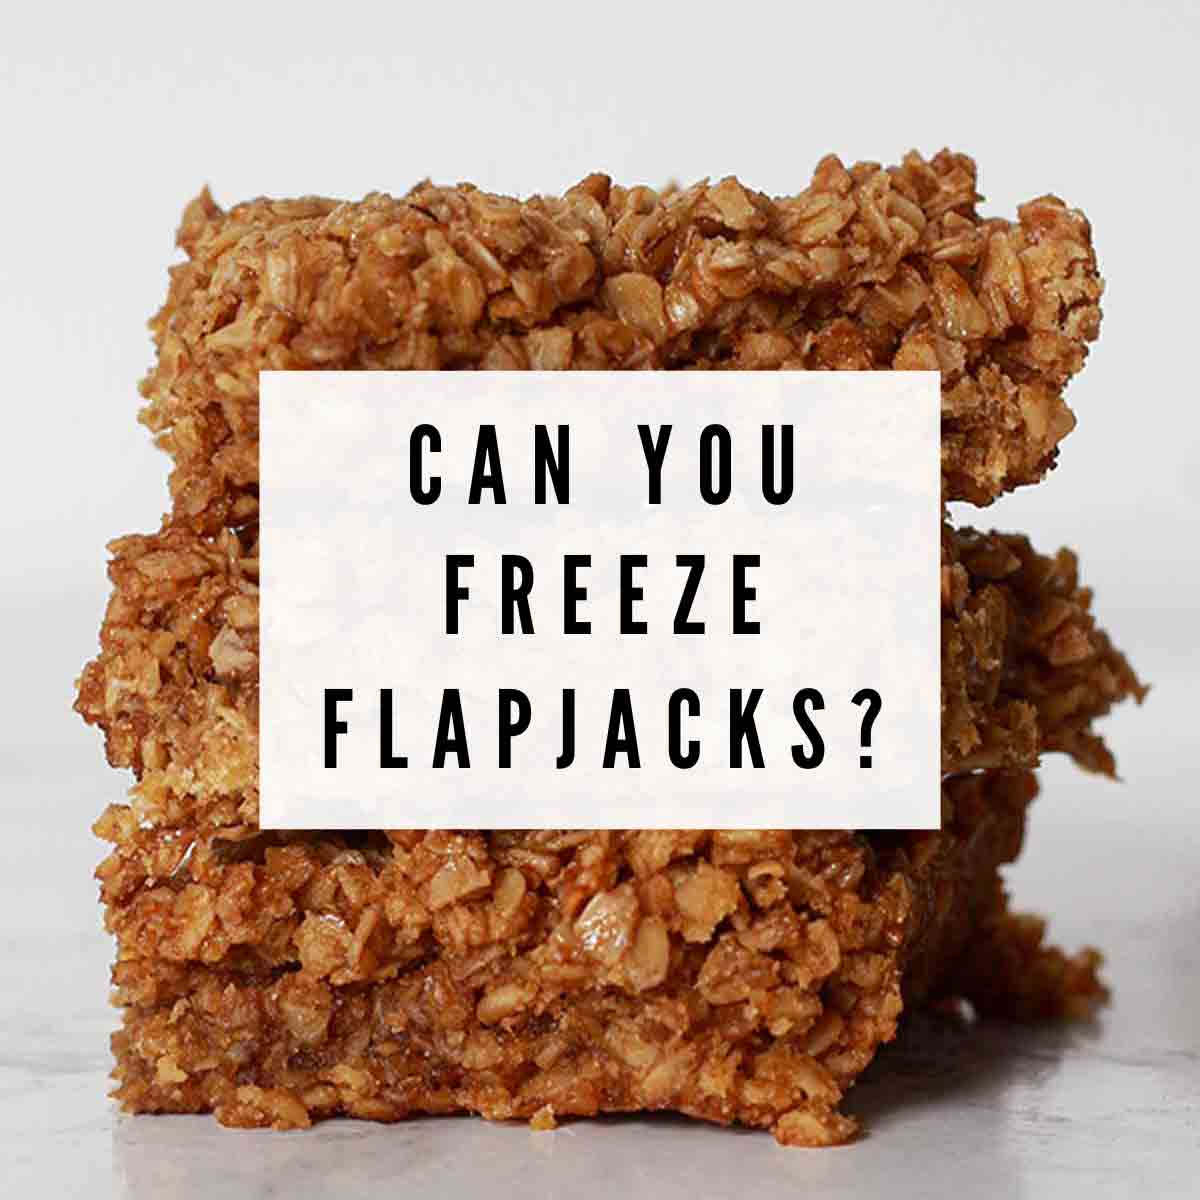 Flapjack Image With Text Overlay That Reads Can You Freeze Flapjacks